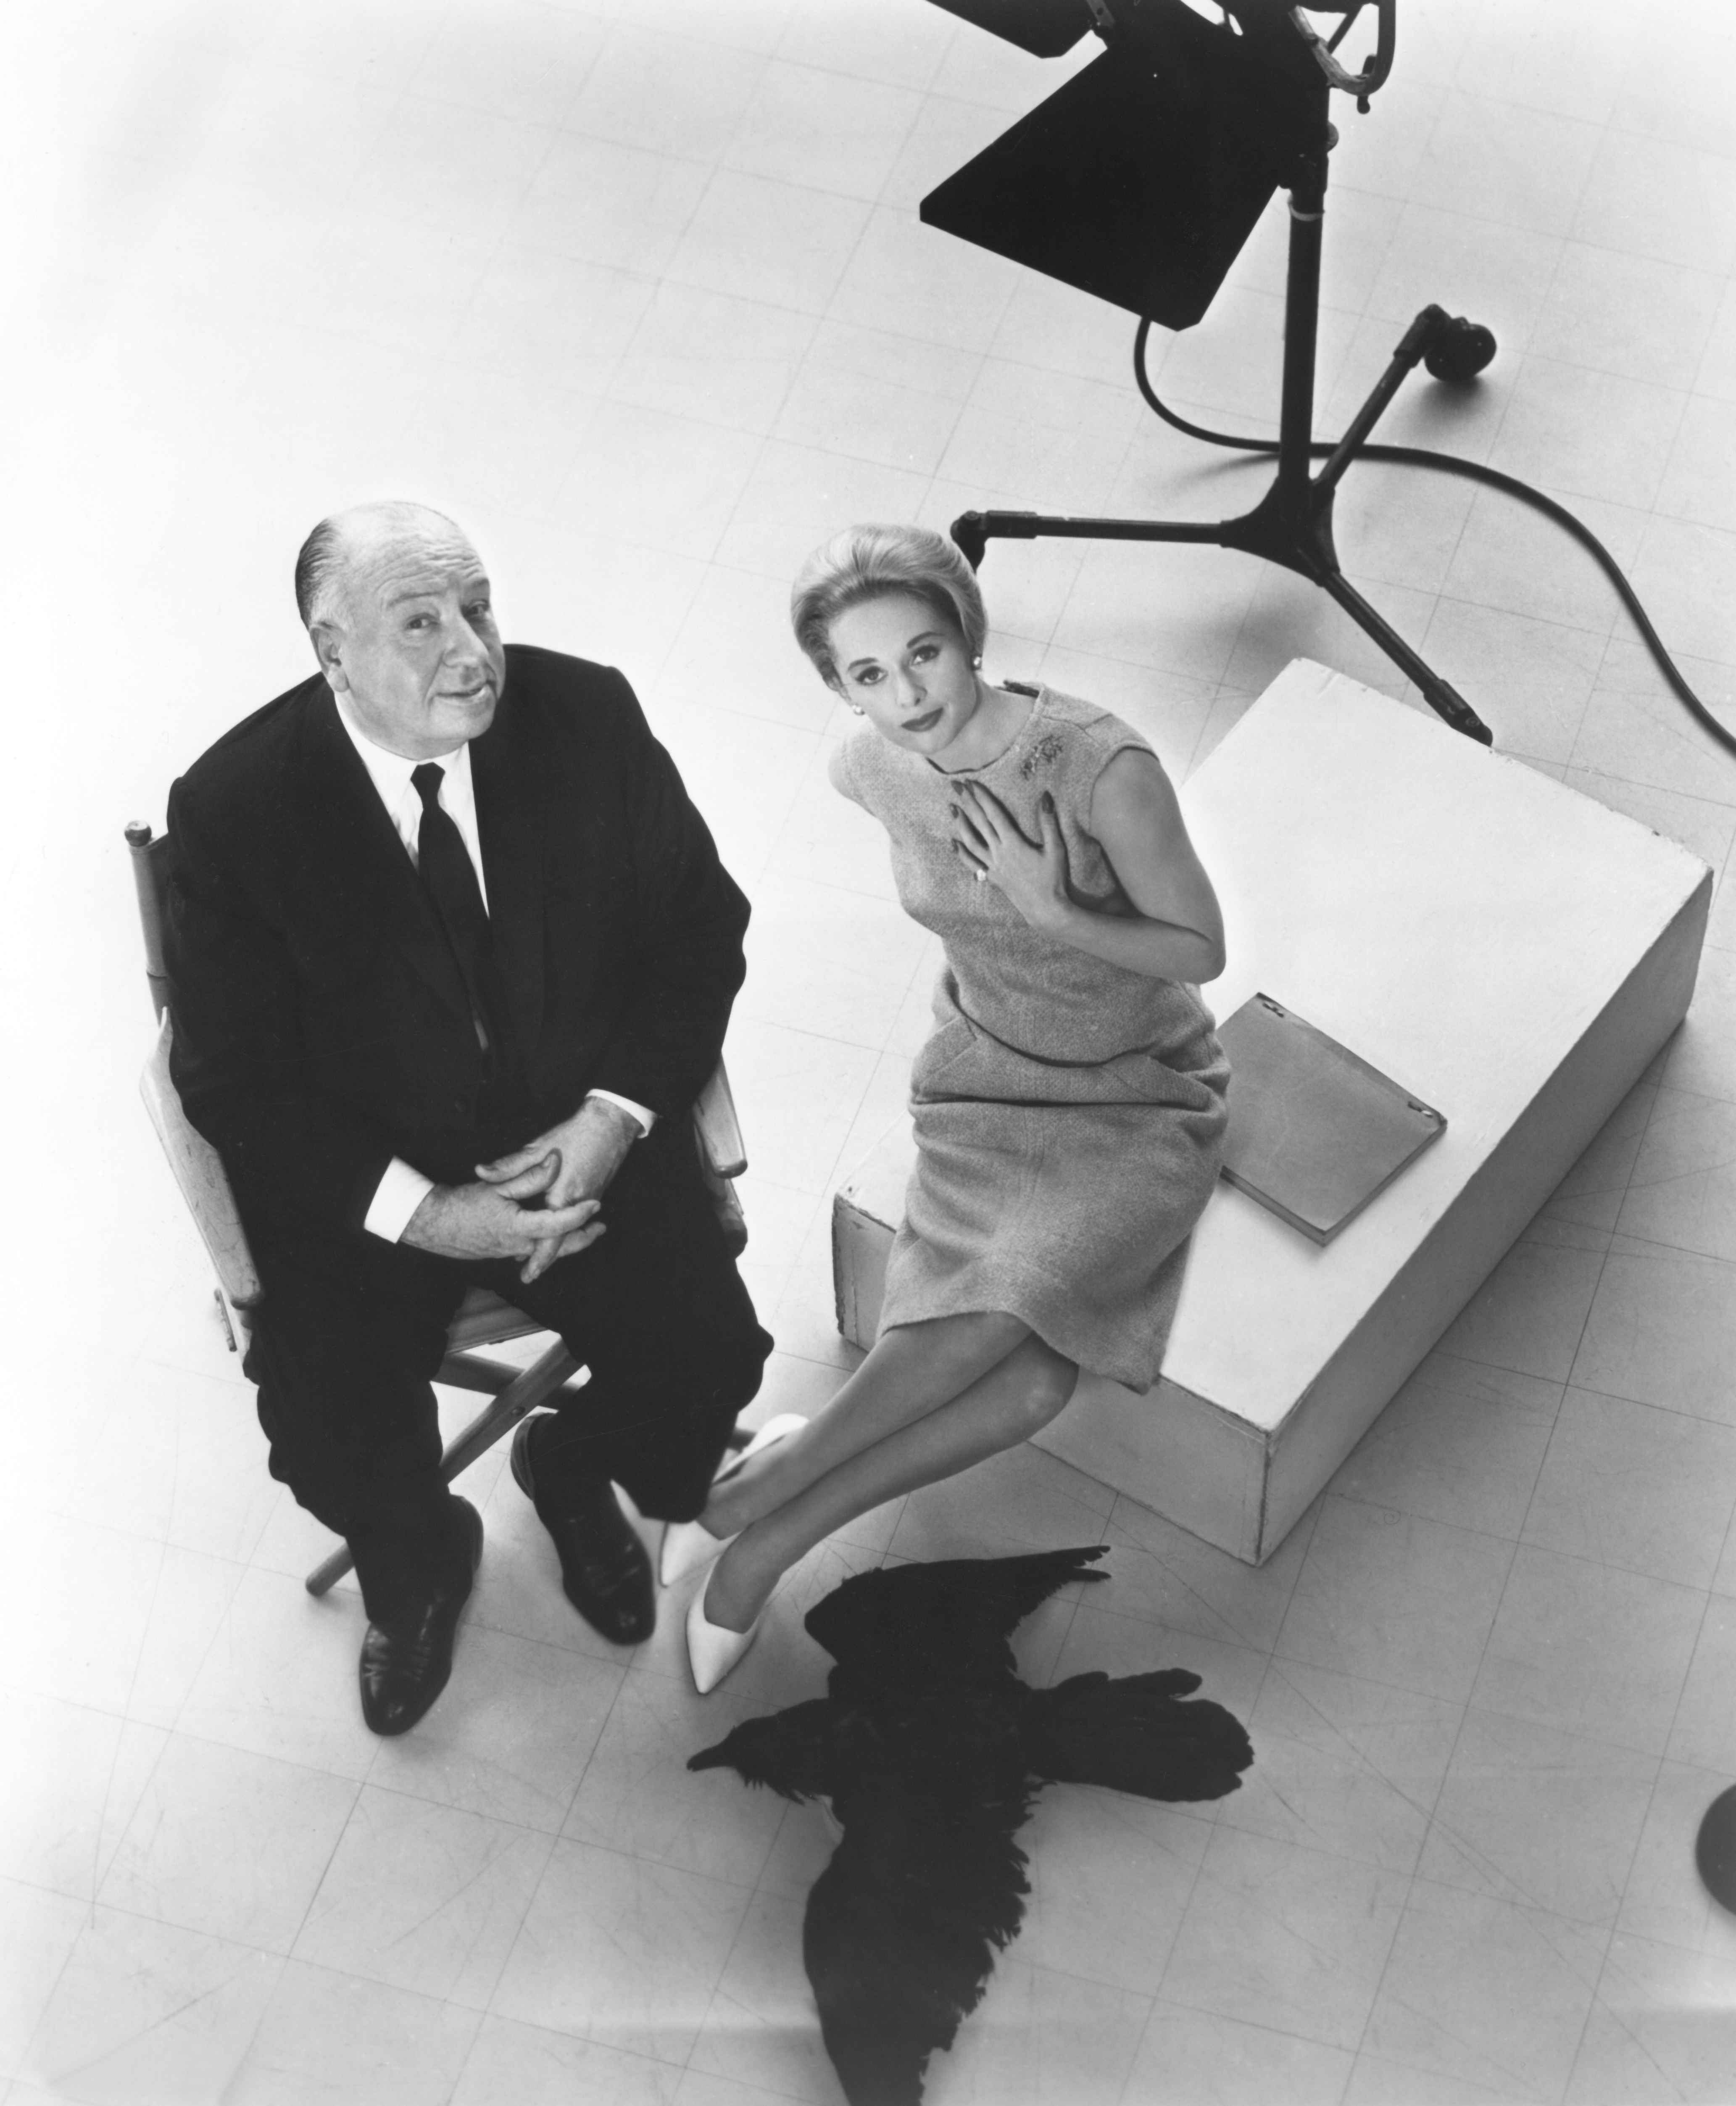 Alfred Hitchcock and Tippi Hedren on the set of "The Birds" in 1963. | Source: Getty Images